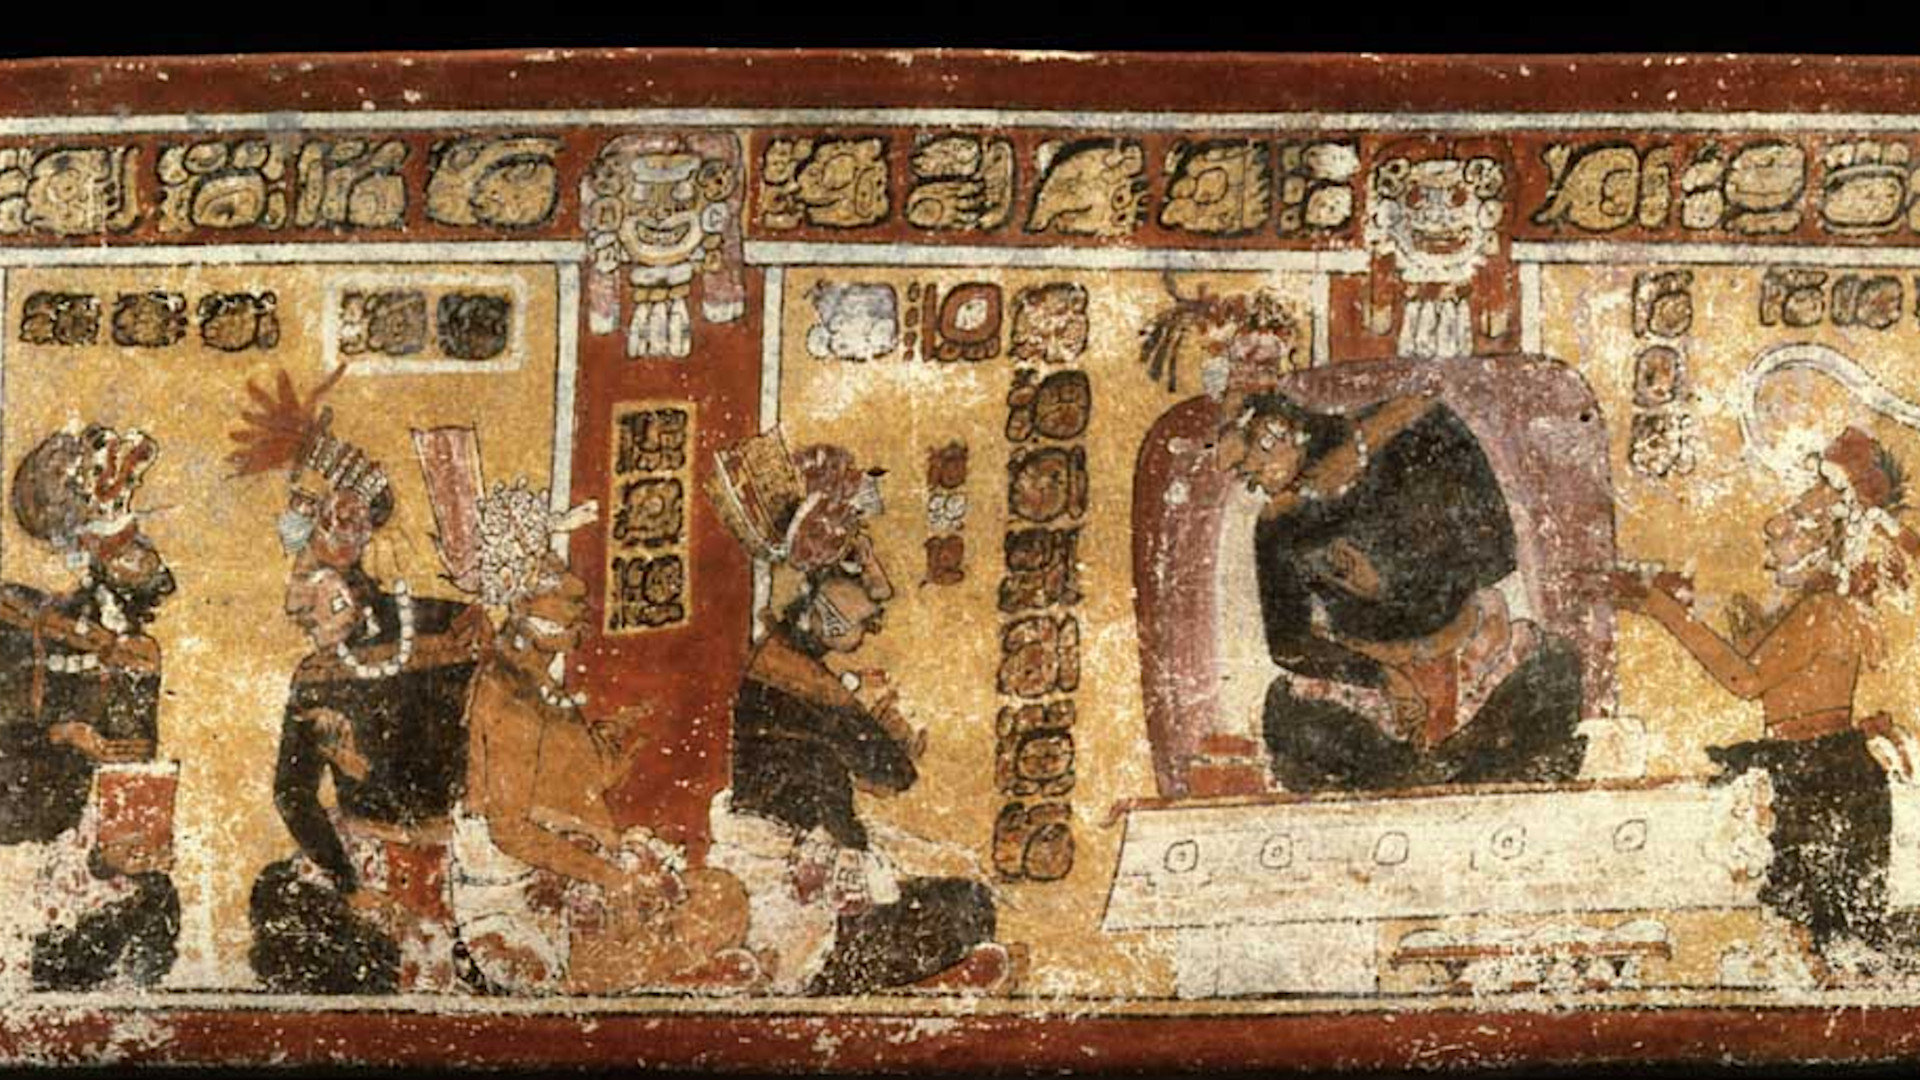 Classic Maya polychrome vase from Dos Pilas showing people covered in black paint. Photo by Justin Kerr, Maya Vase Database.